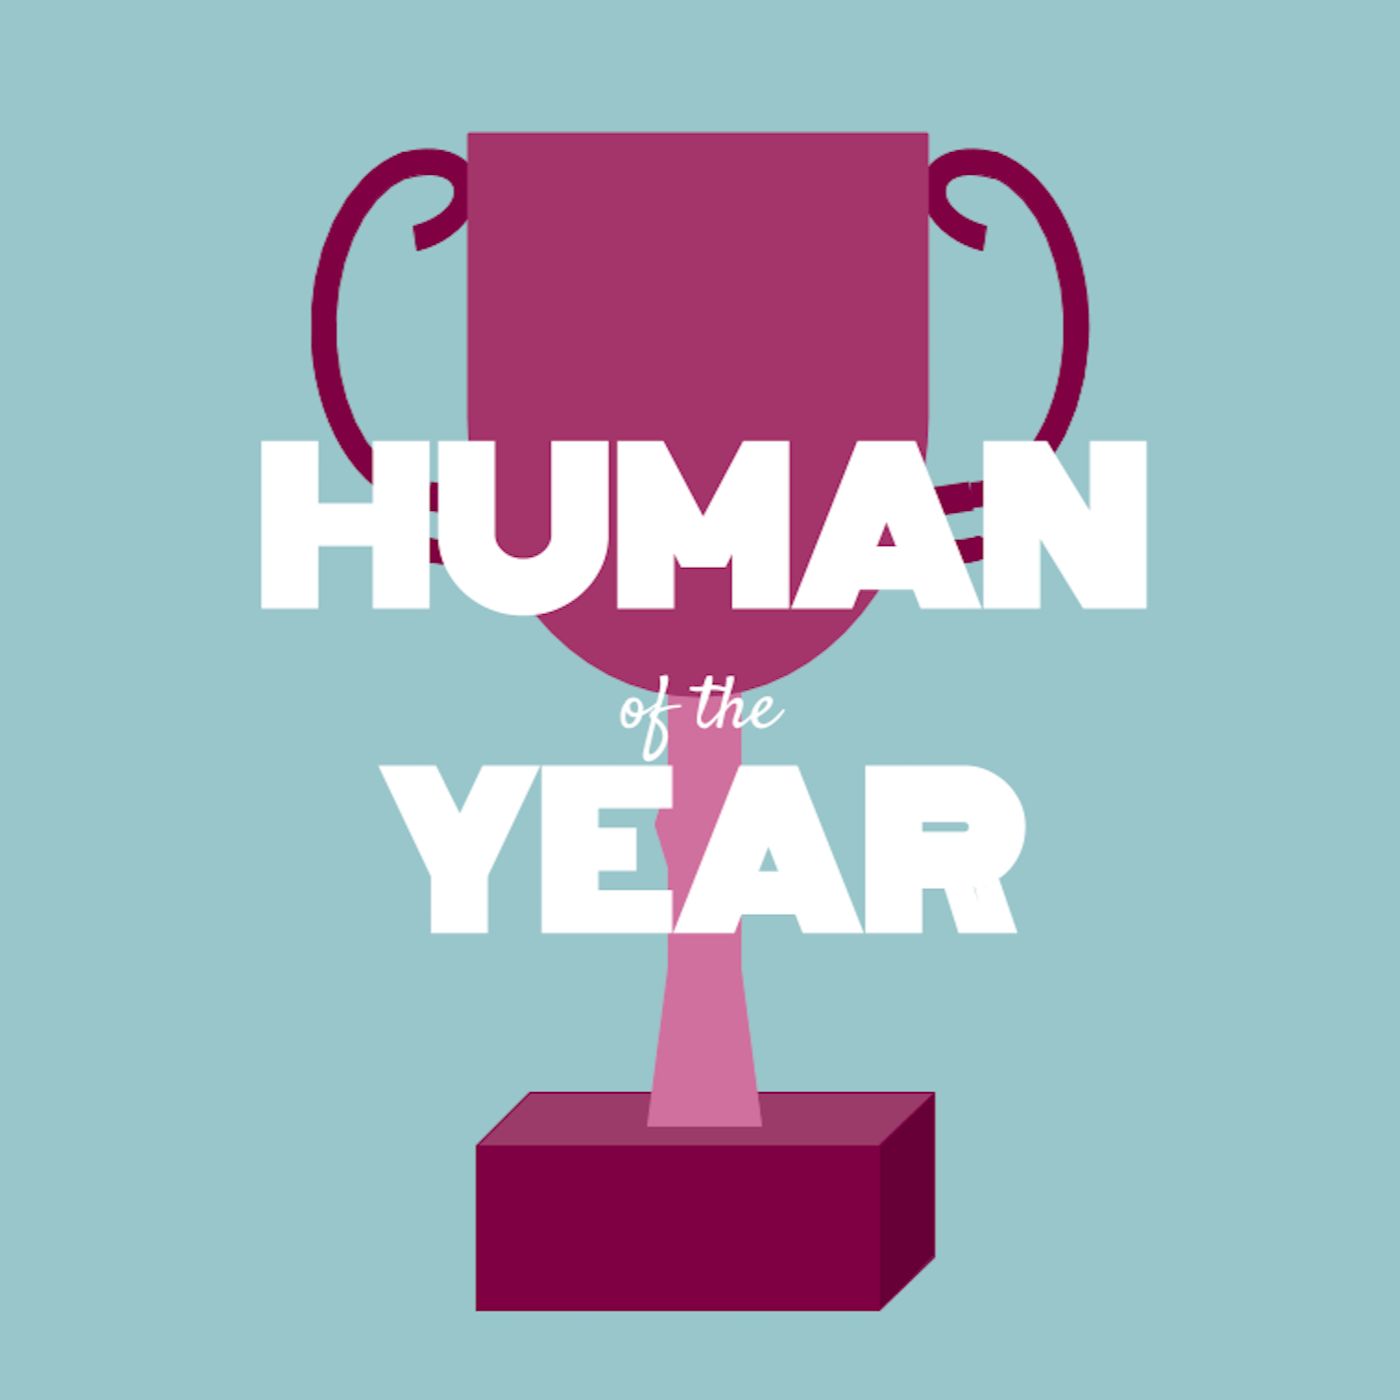 Human of the Year